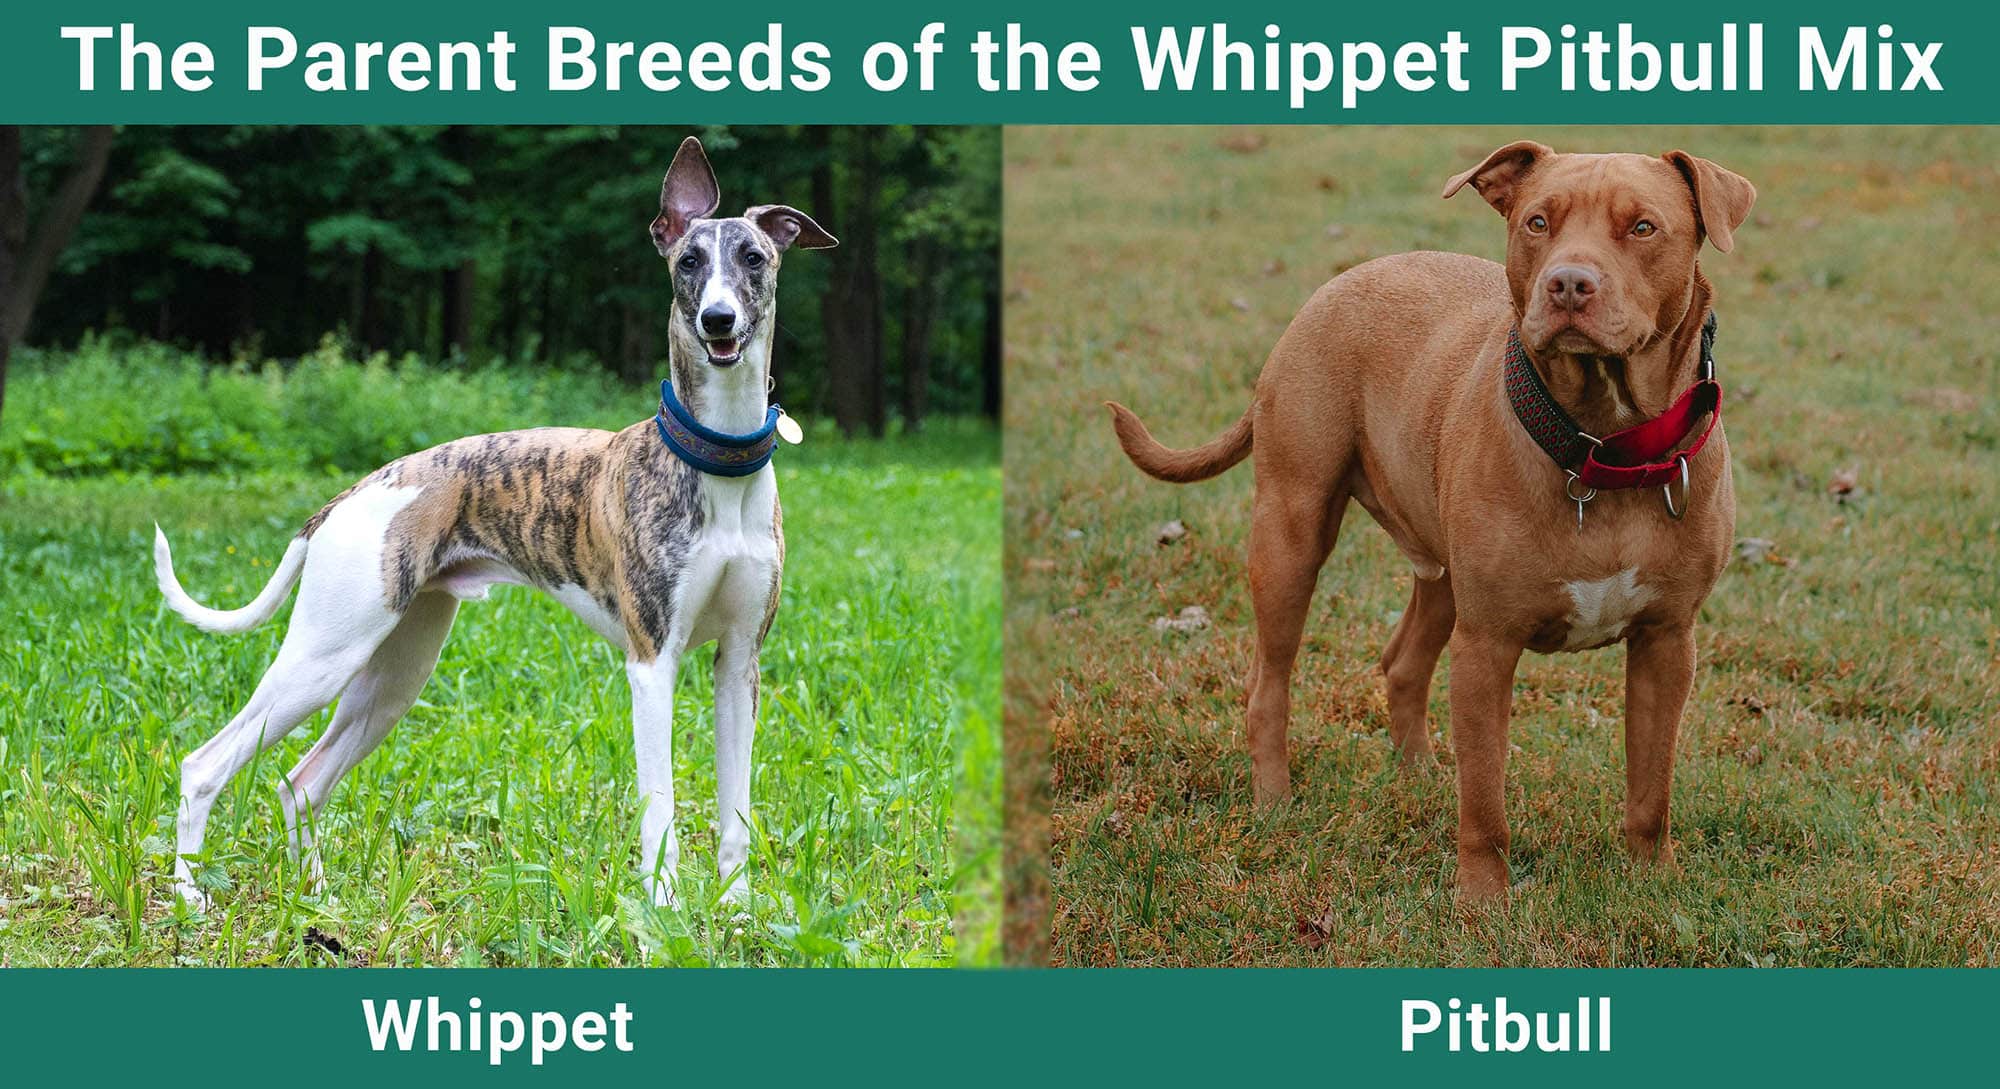 The Parent Breeds of the Whippet Pitbull Mix